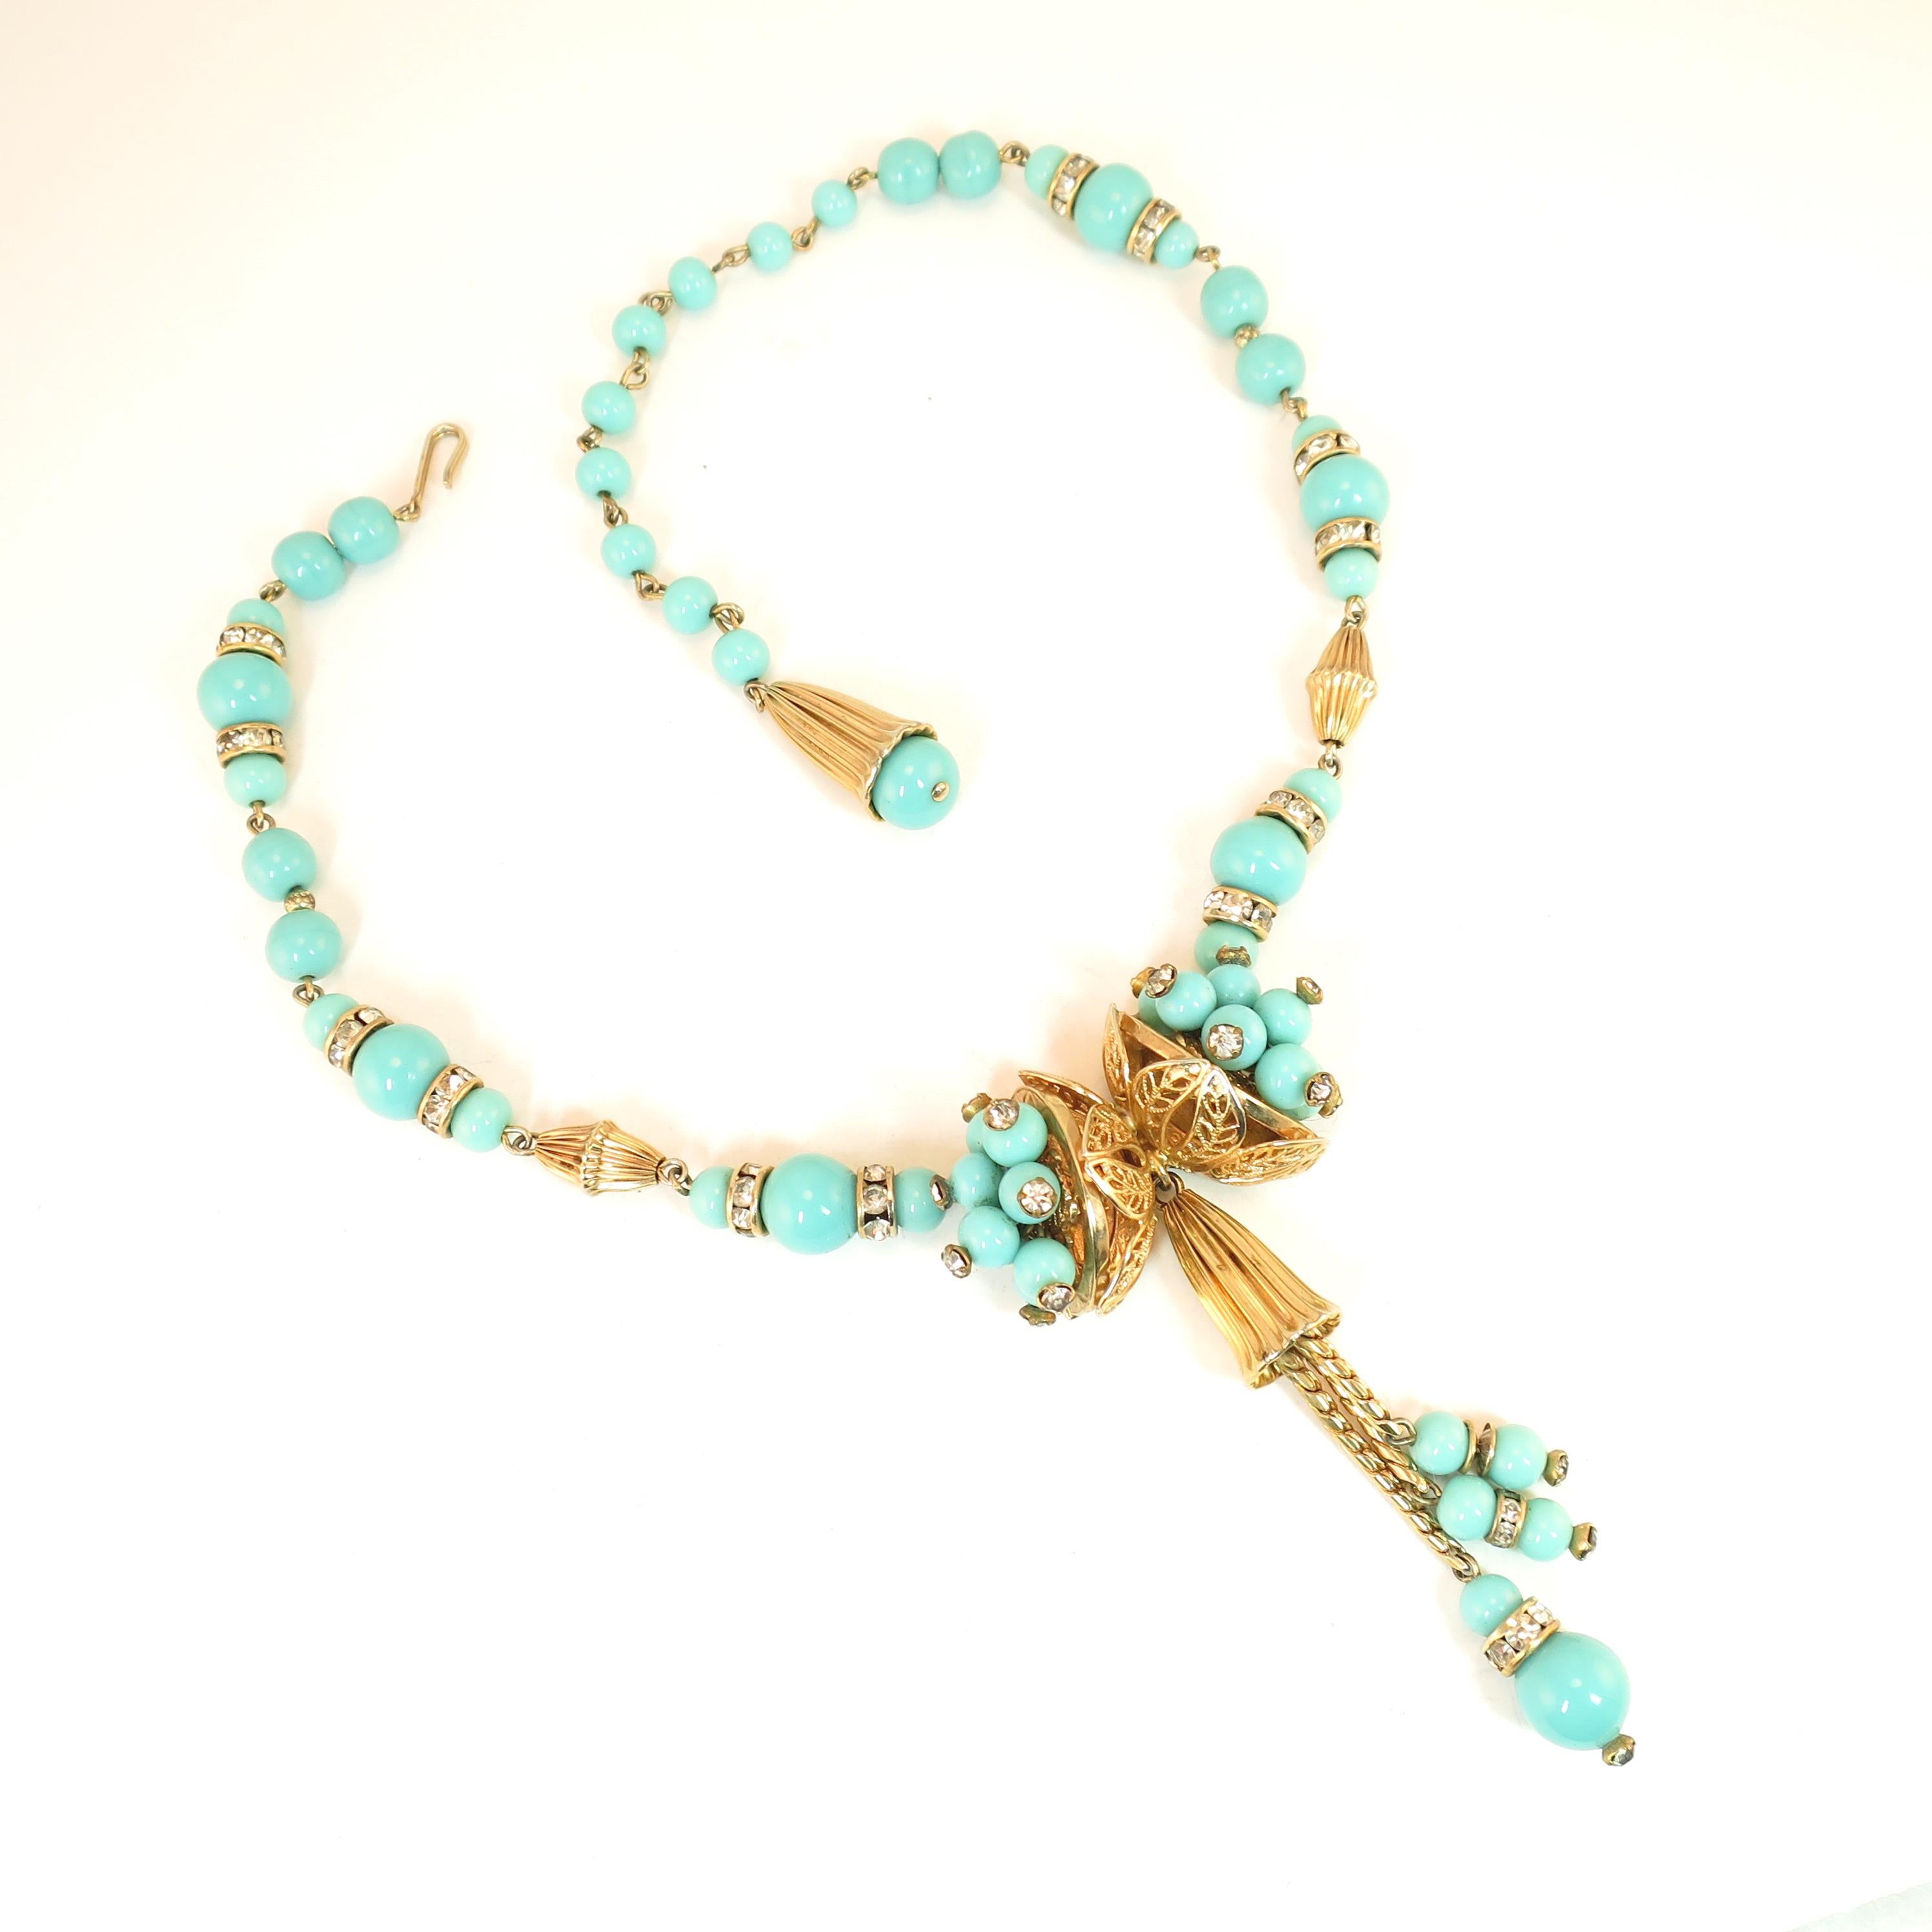 Women's Miriam Haskell Turquoise Glass Necklace & Bracelet Set, Made in Germany 1950s For Sale